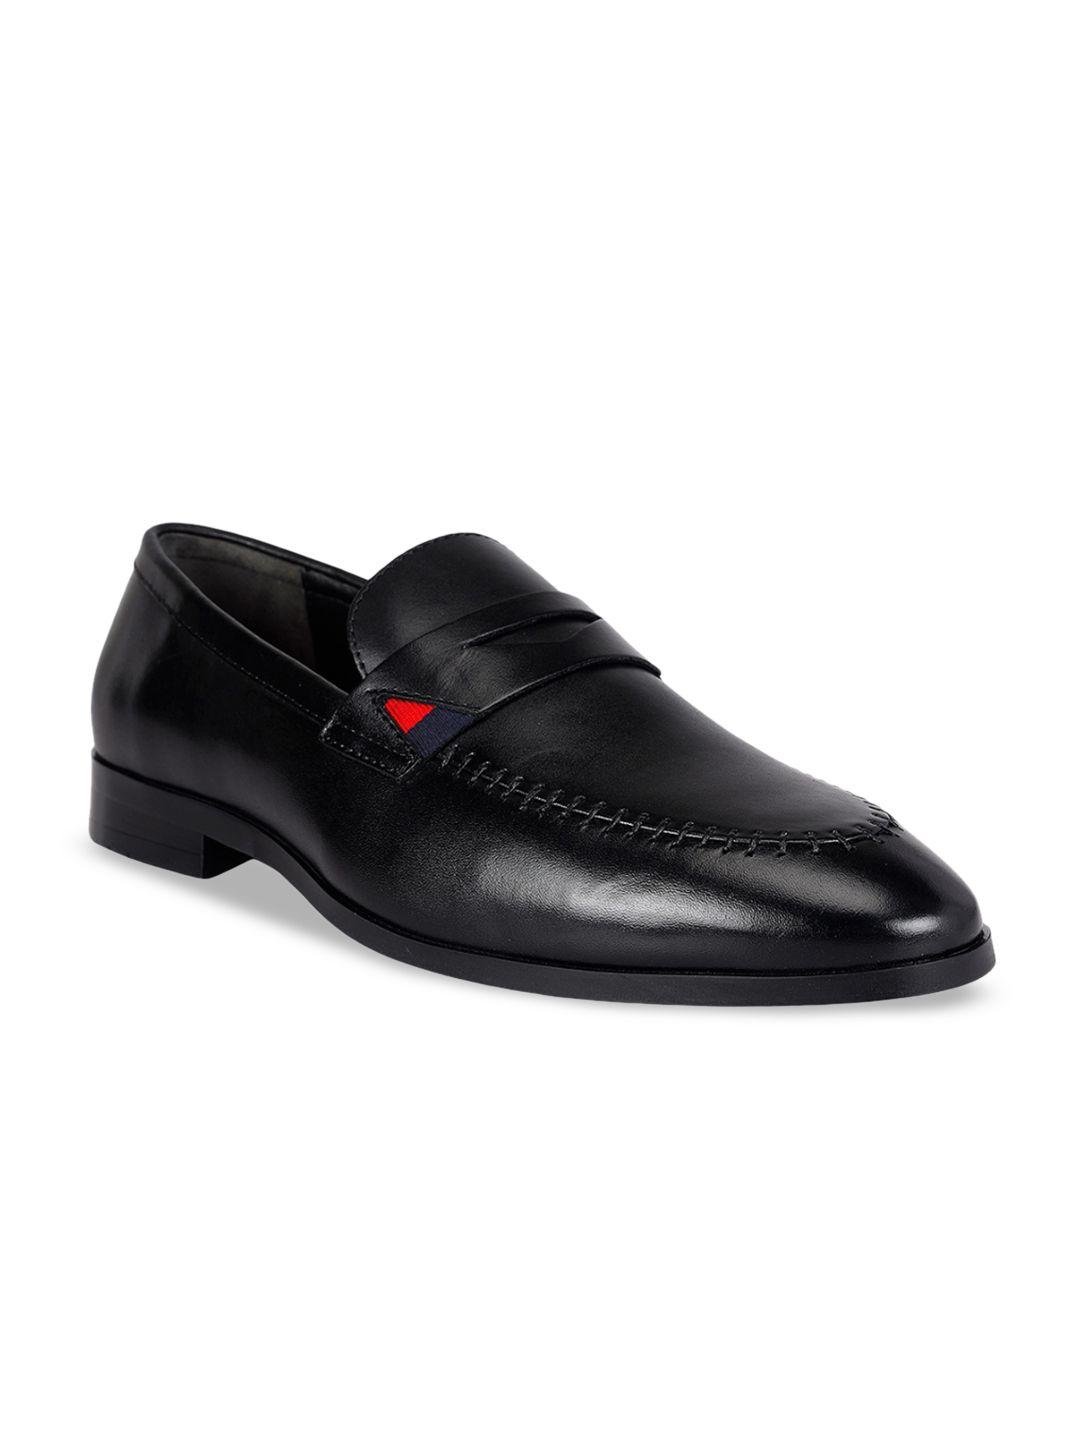 rosso-brunello-men-leather-formal-penny-loafers